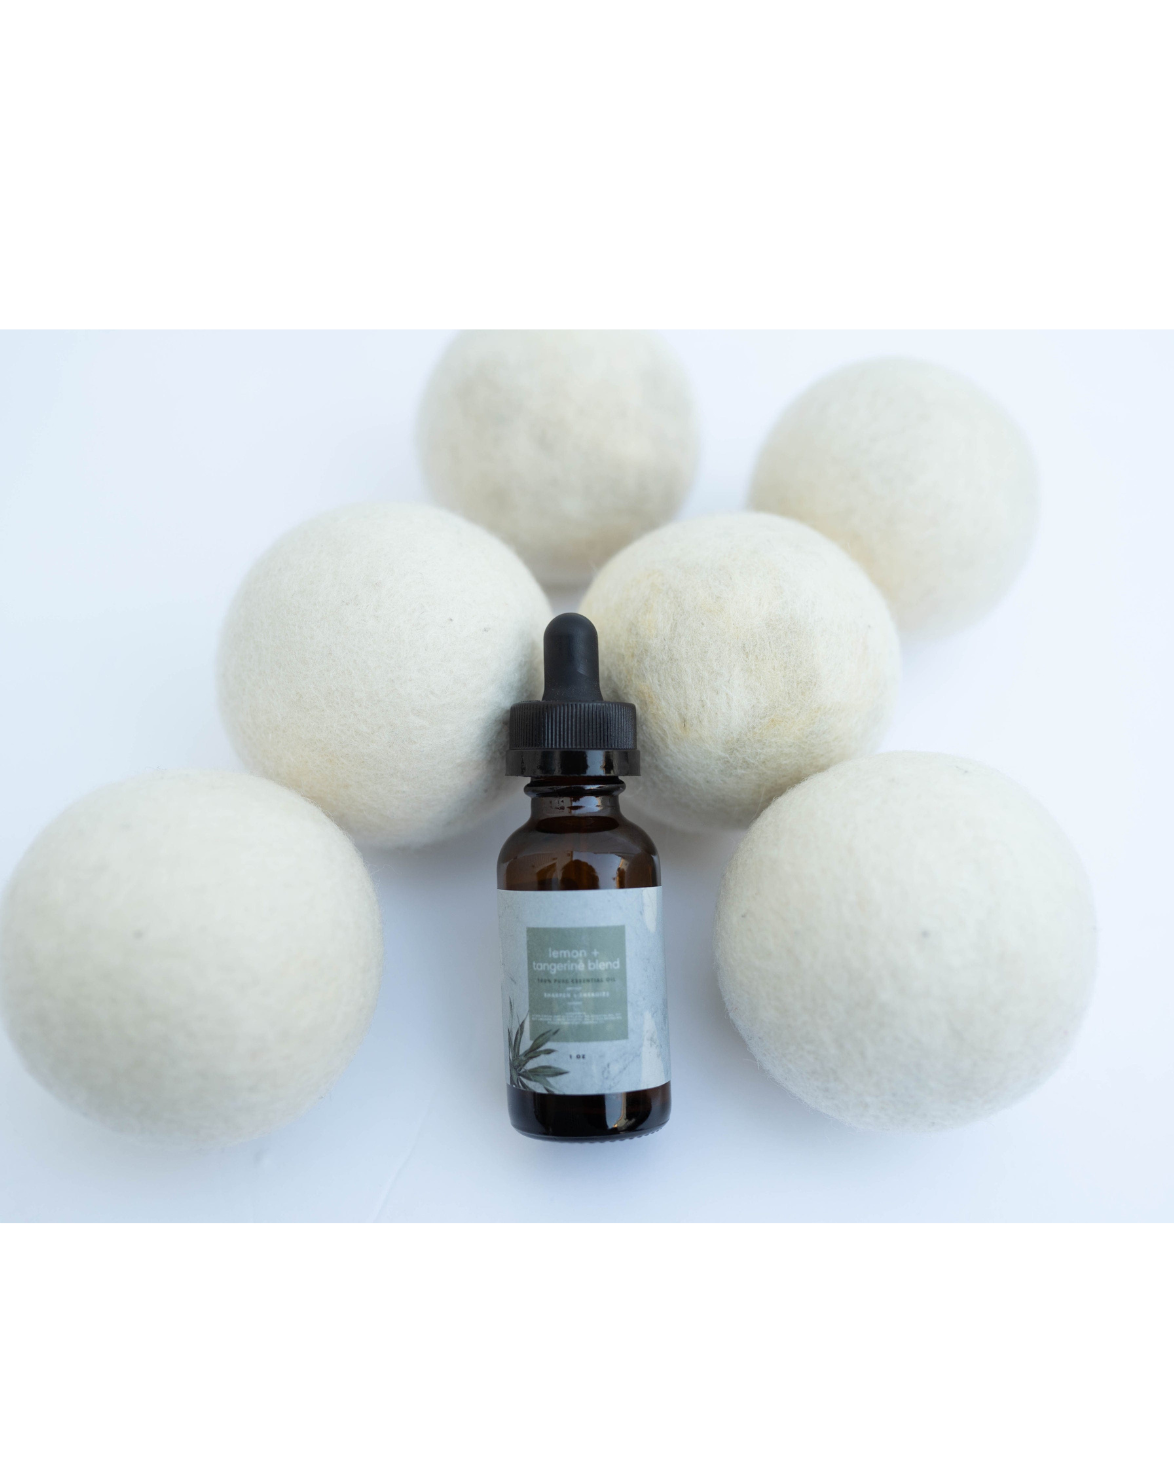 Wool Dryer Balls With Essential Oils